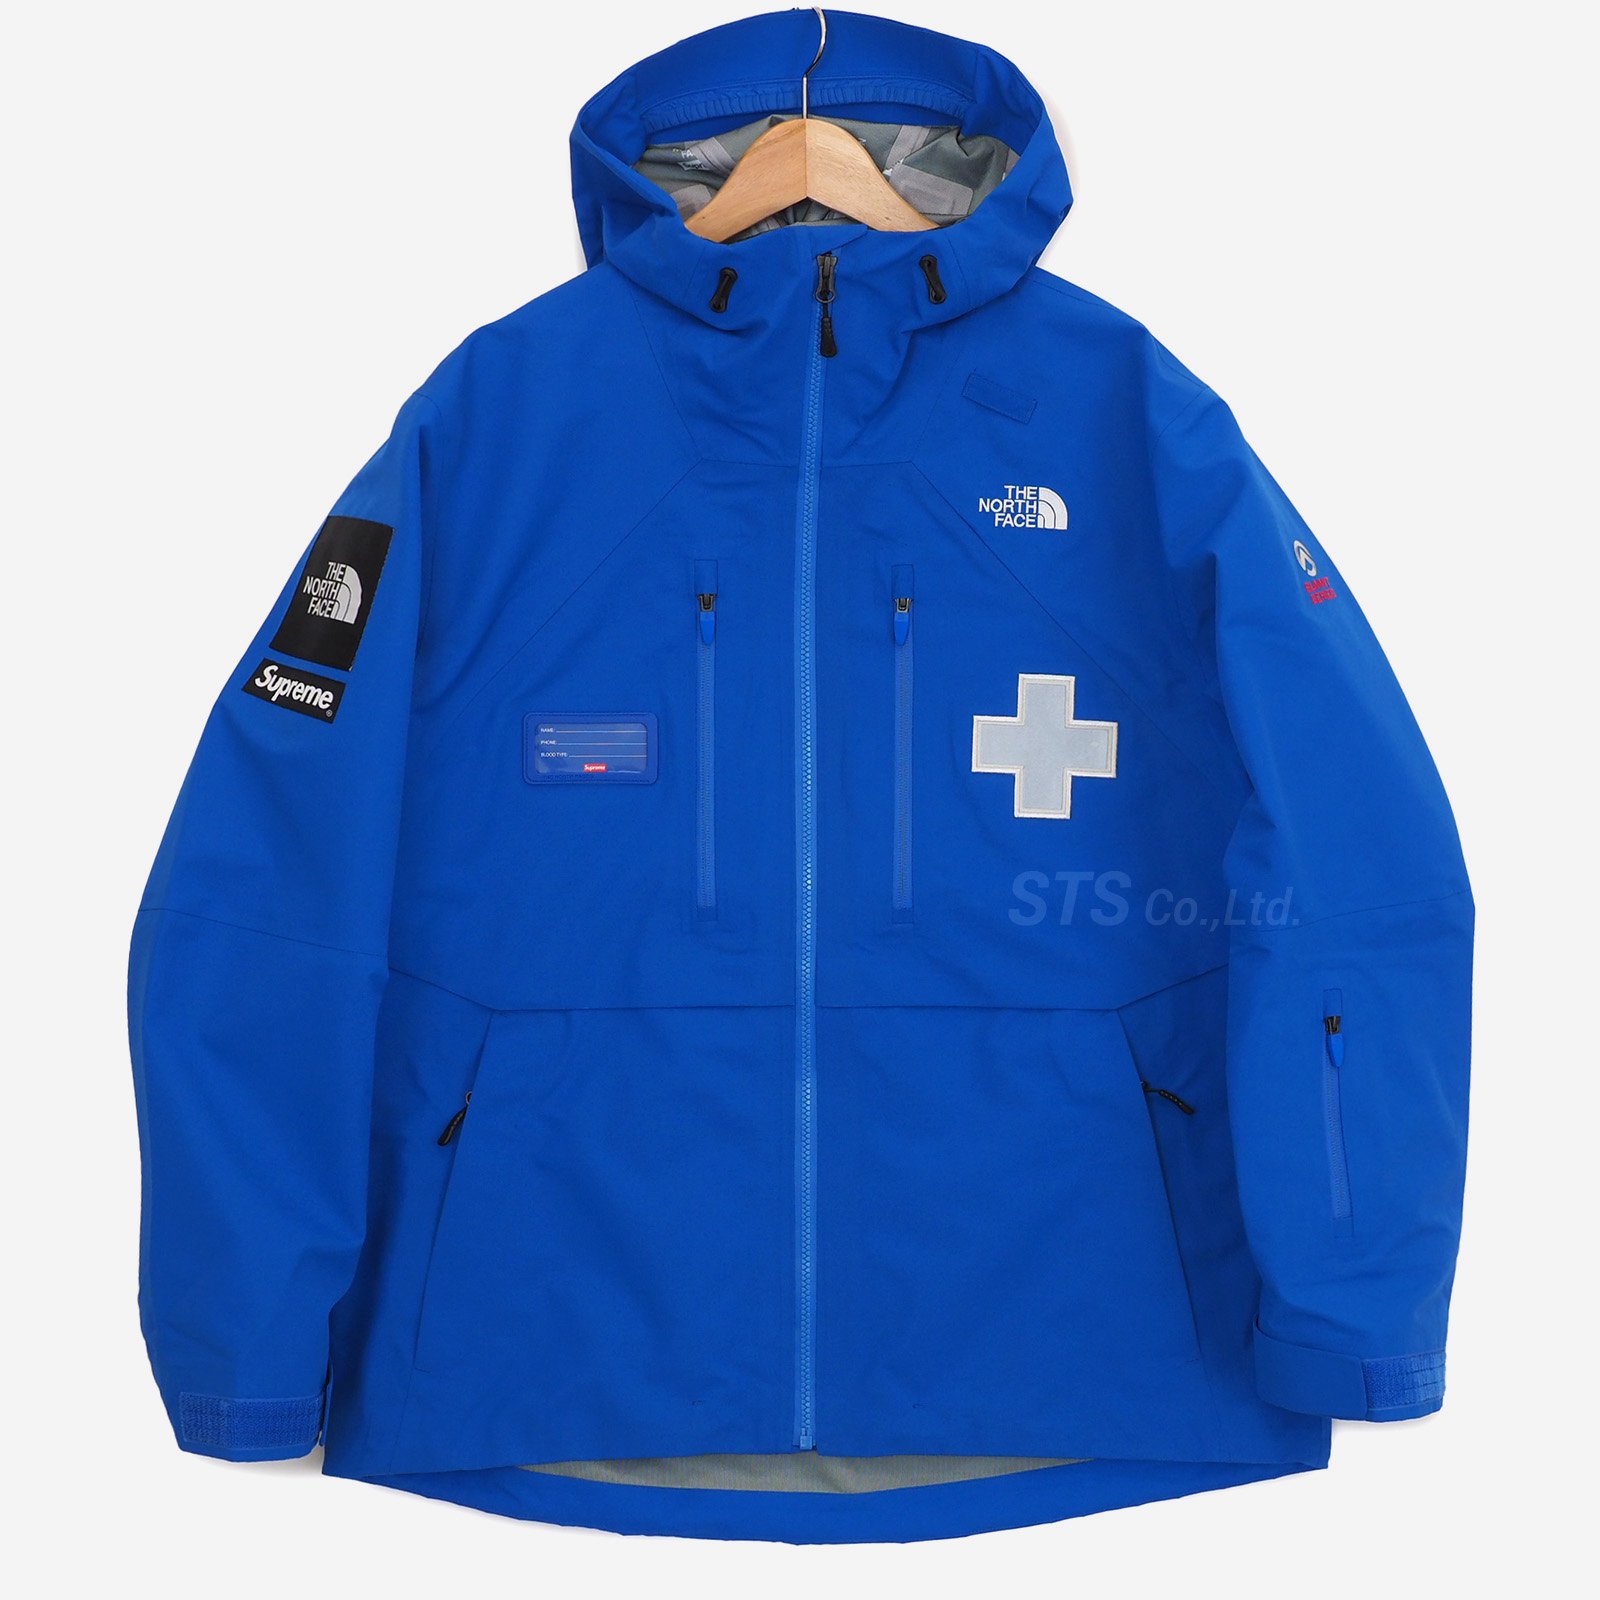 Supreme x The North Face Summit Series Rescue Mountain Pro Jacket